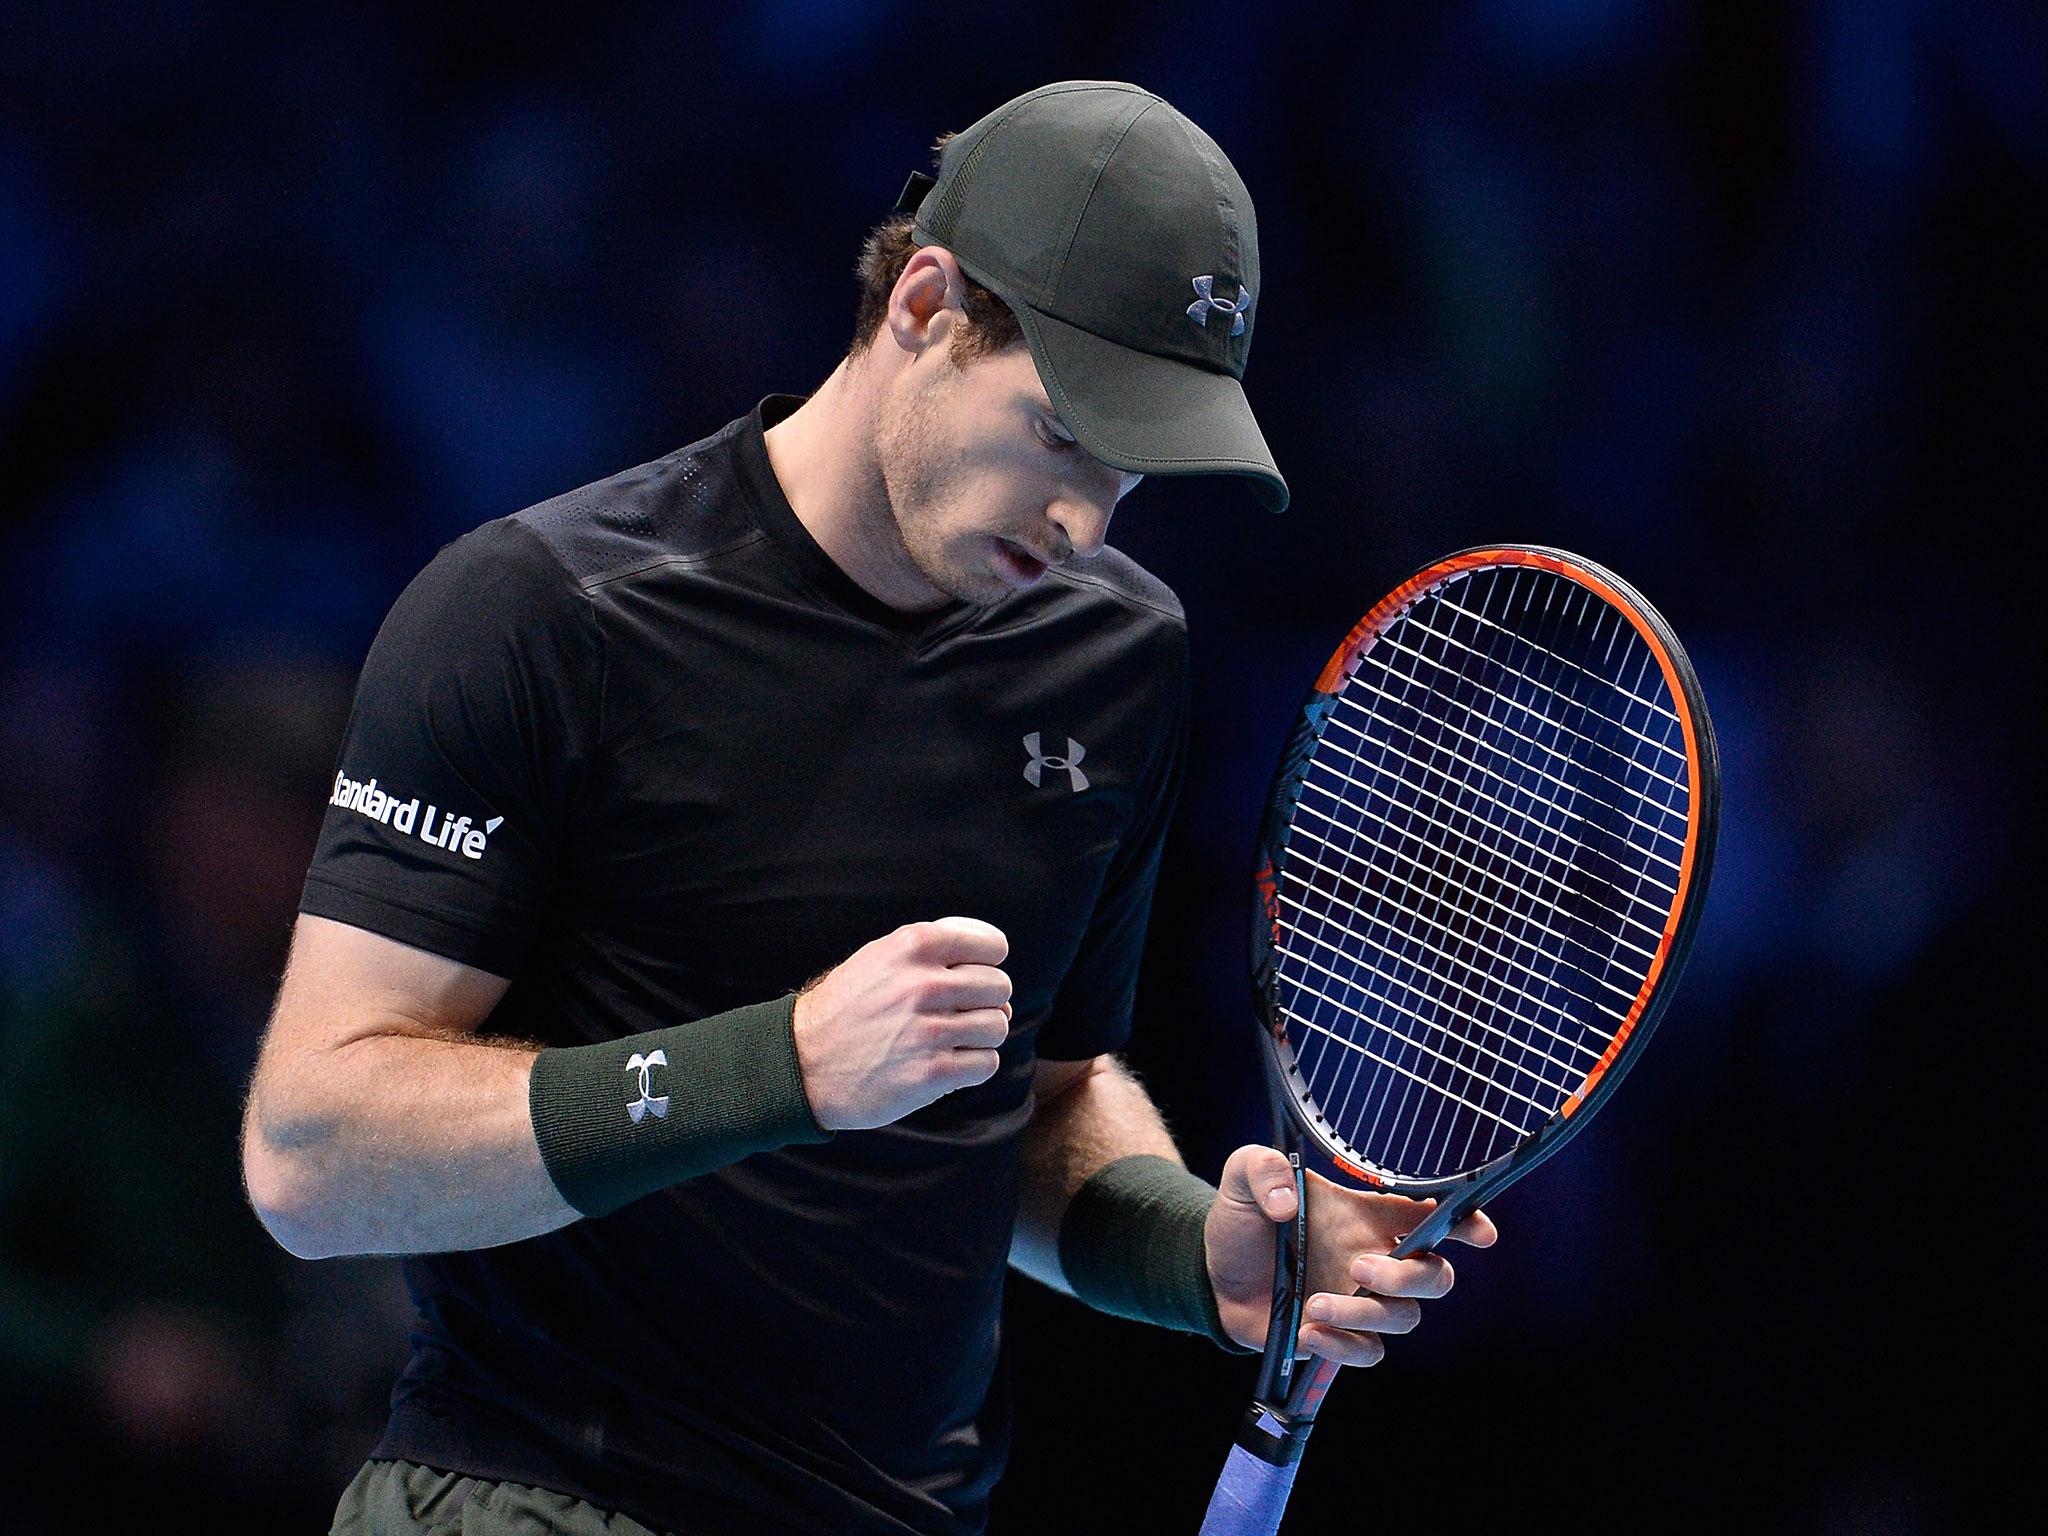 Andy Murray vs Novak Djokovic live Murray beats Djokovic to win the ATP Finals and clinch world No 1 ranking The Independent The Independent